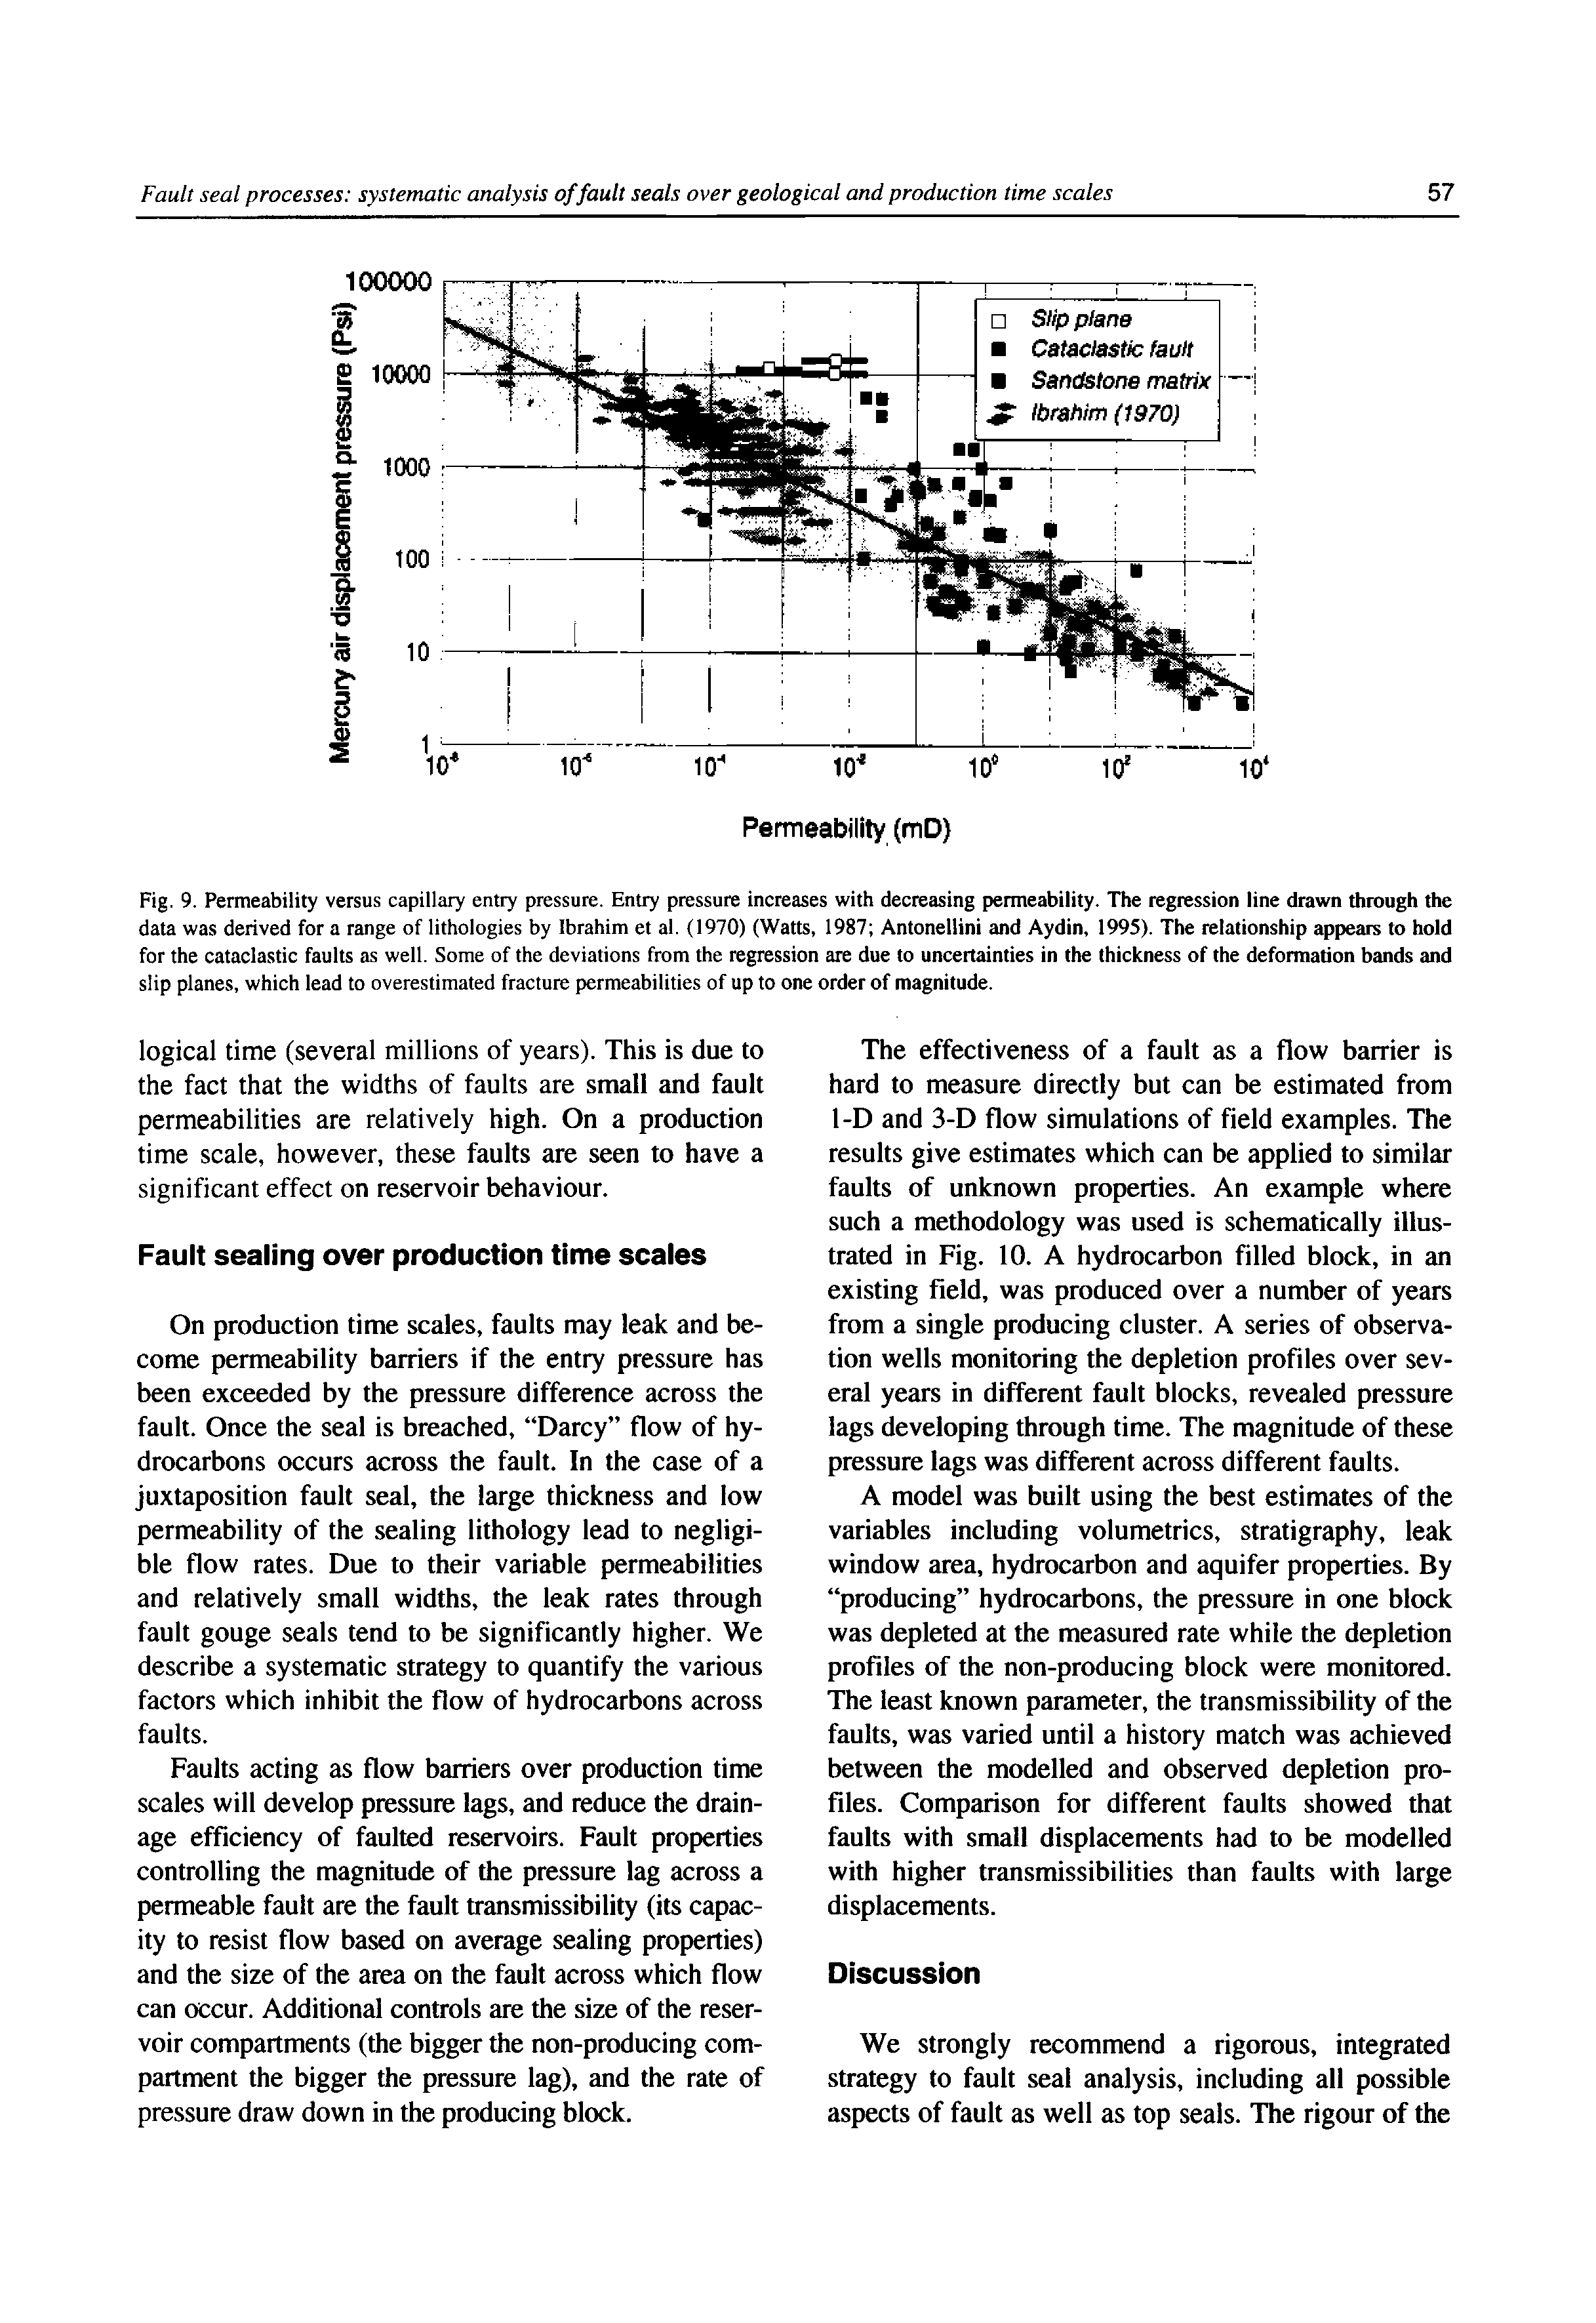 Fig. 9. Permeability versus capillary entry pressure. Entry pressure increases with decreasing permeability. The regression line drawn through the data was derived for a range of lithologies by Ibrahim et al. (1970) (Watts, 1987 Antonellini and Aydin, 1995). The relationship appears to hold for the cataclastic faults as well. Some of the deviations from the regression are due to uncertainties in the thickness of the deformation bands and slip planes, which lead to overestimated fracture permeabilities of up to one order of magnitude.